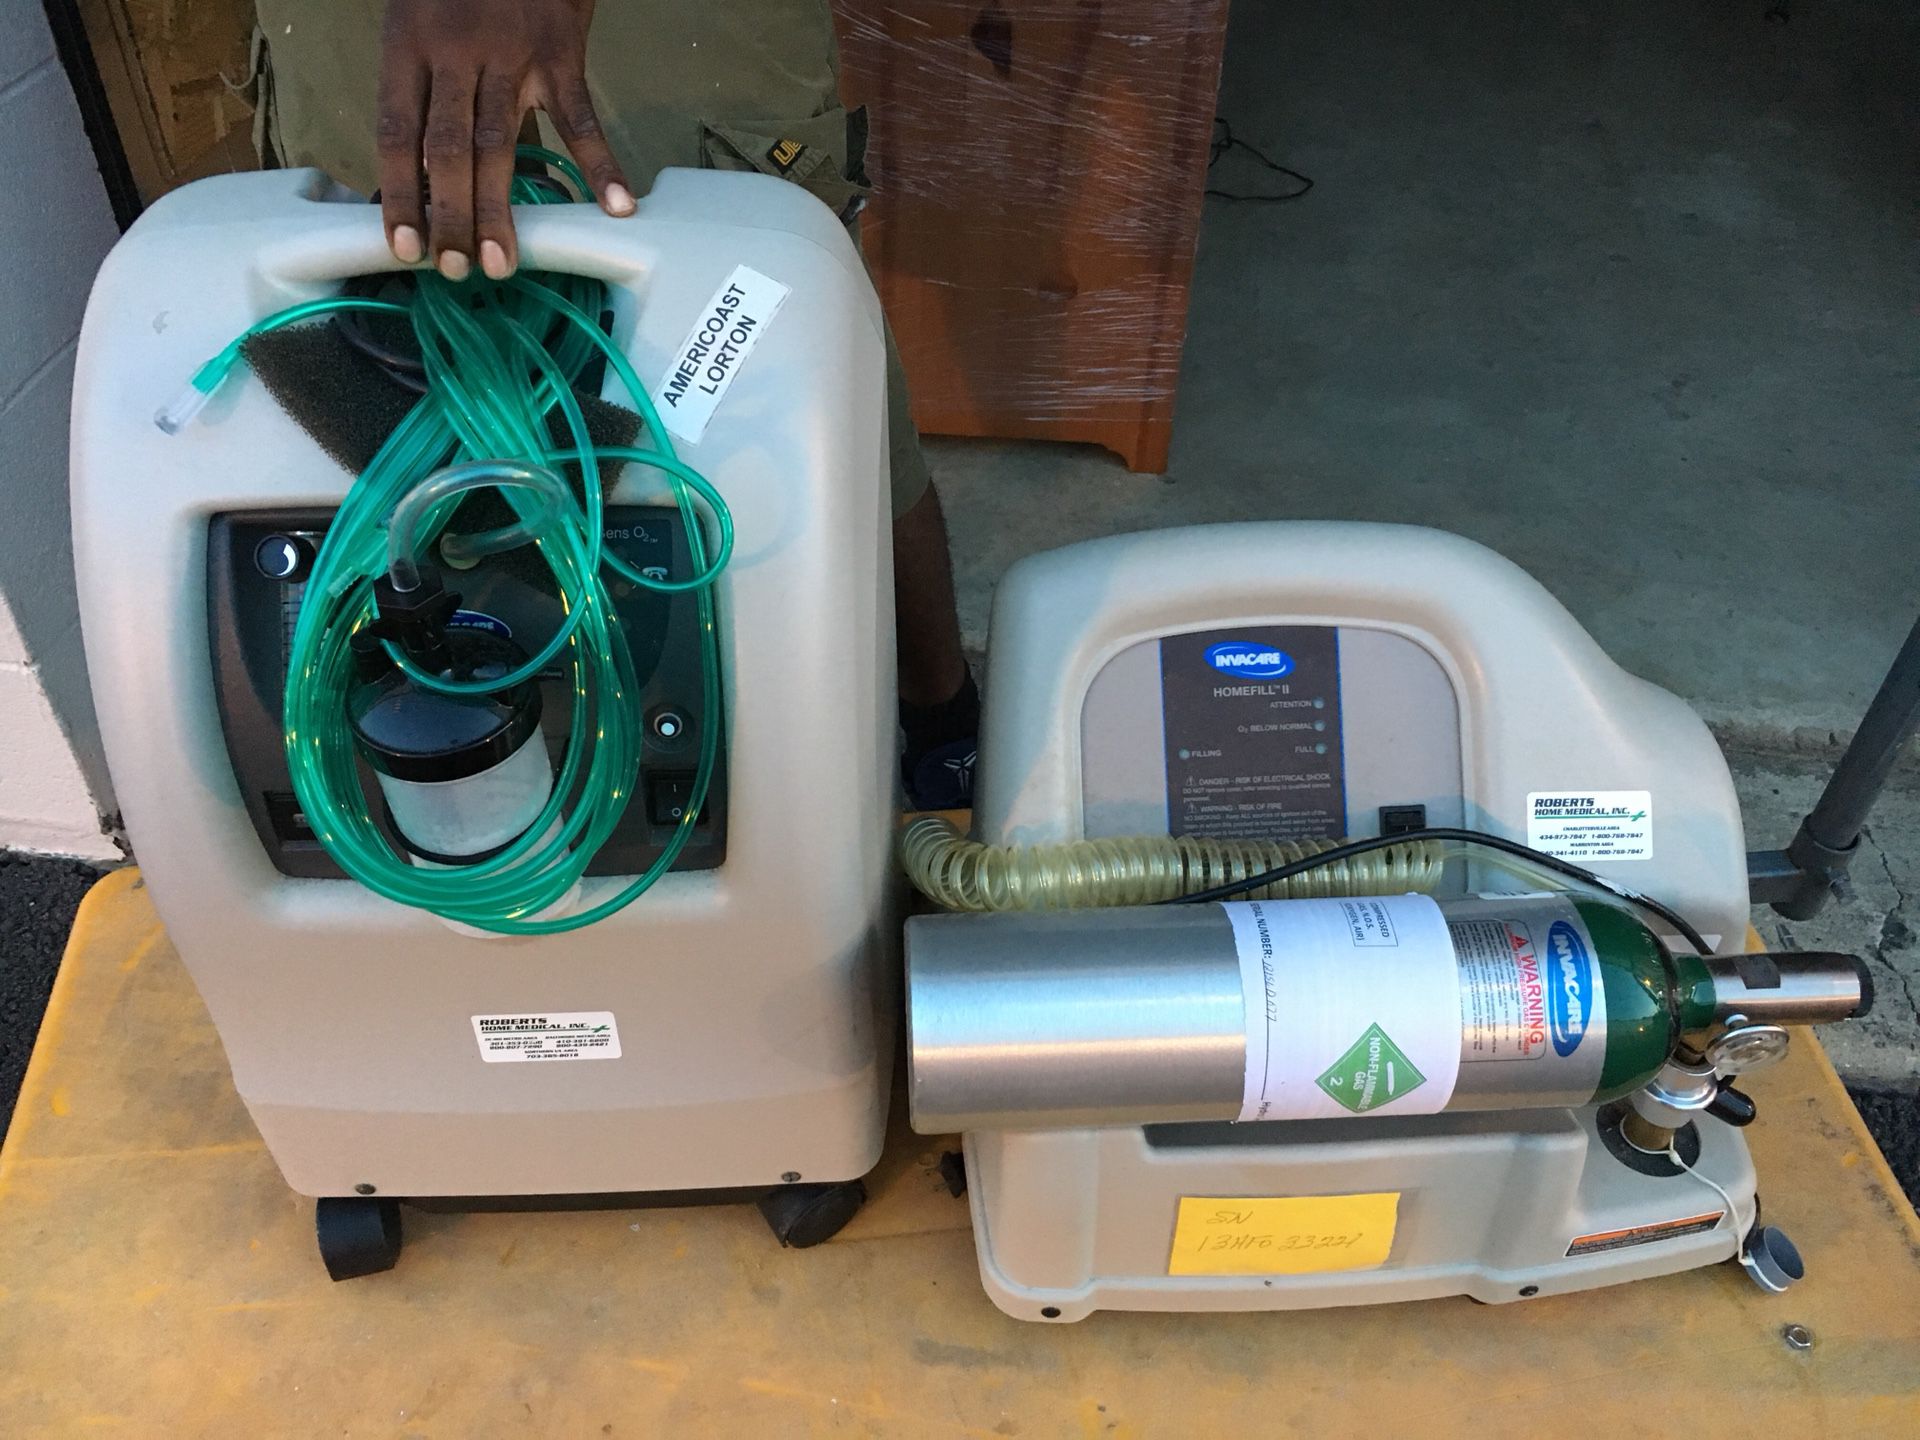 Oxygen Machines - $500 each firm - like new